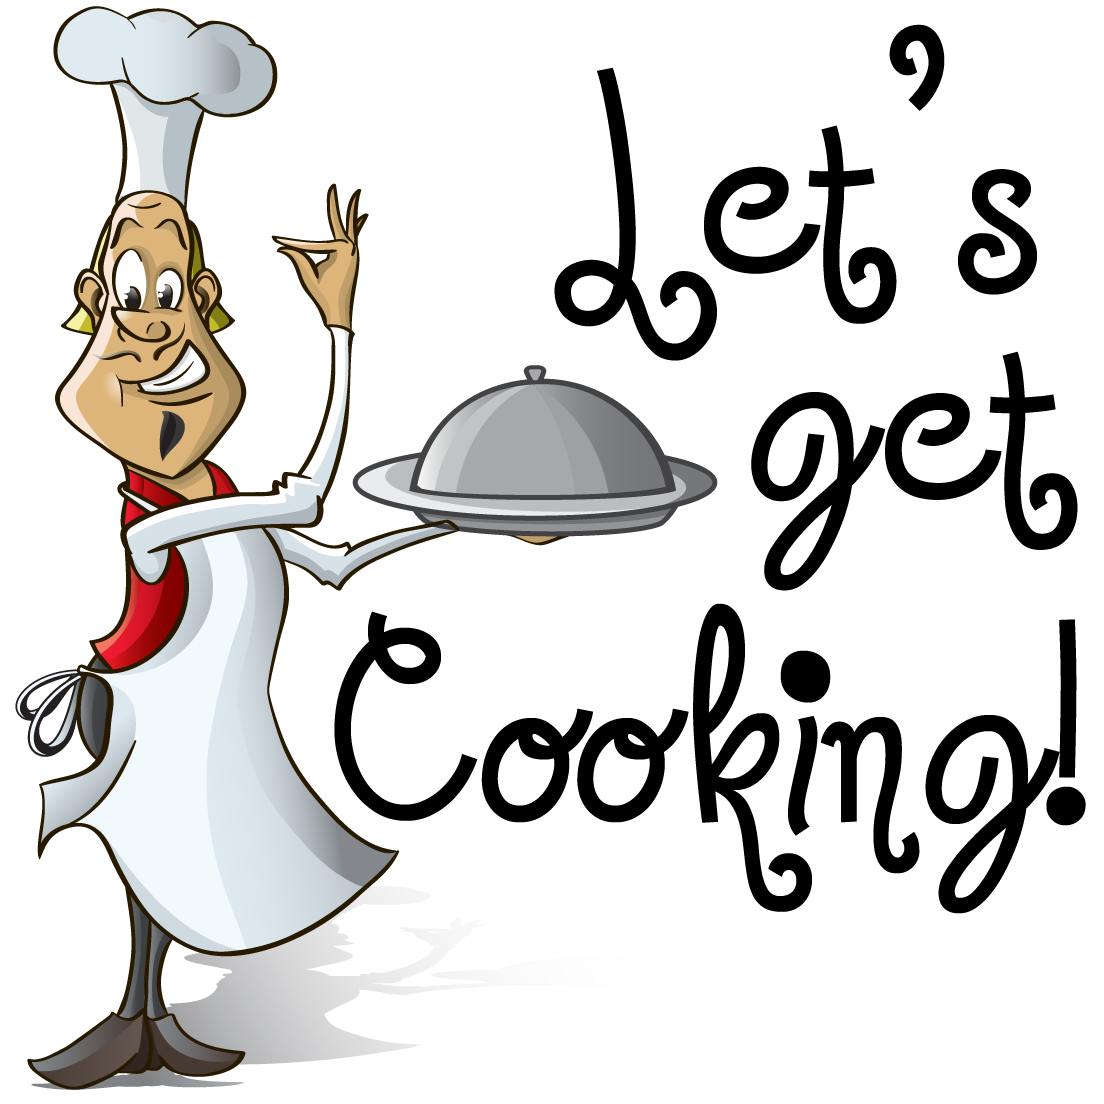 Free Cooking Class Cliparts, Download Free Clip Art, Free Clip Art on